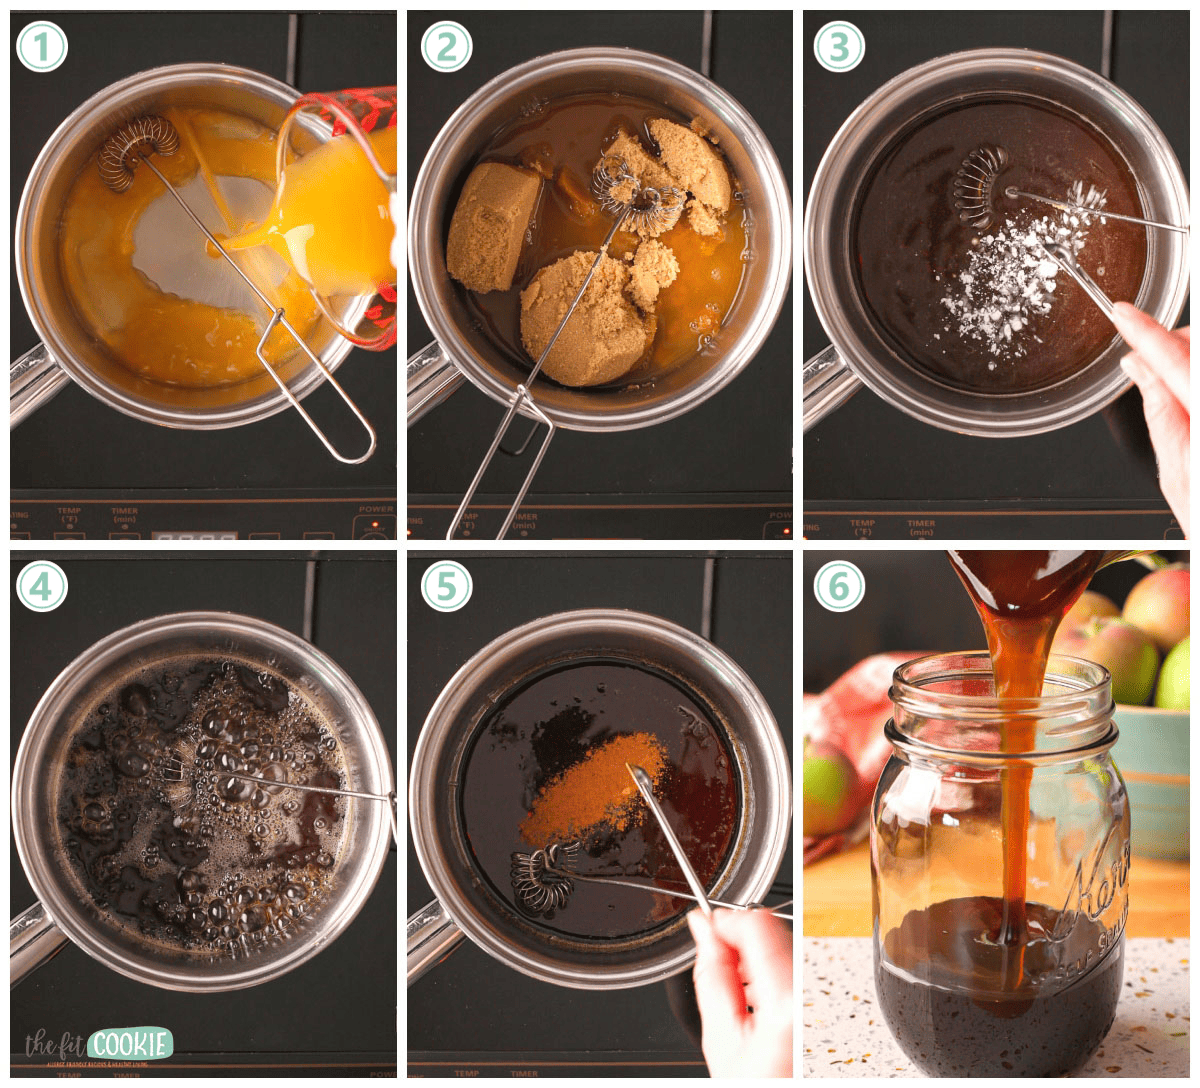 A series of photos showing how to make apple brown sugar syrup.